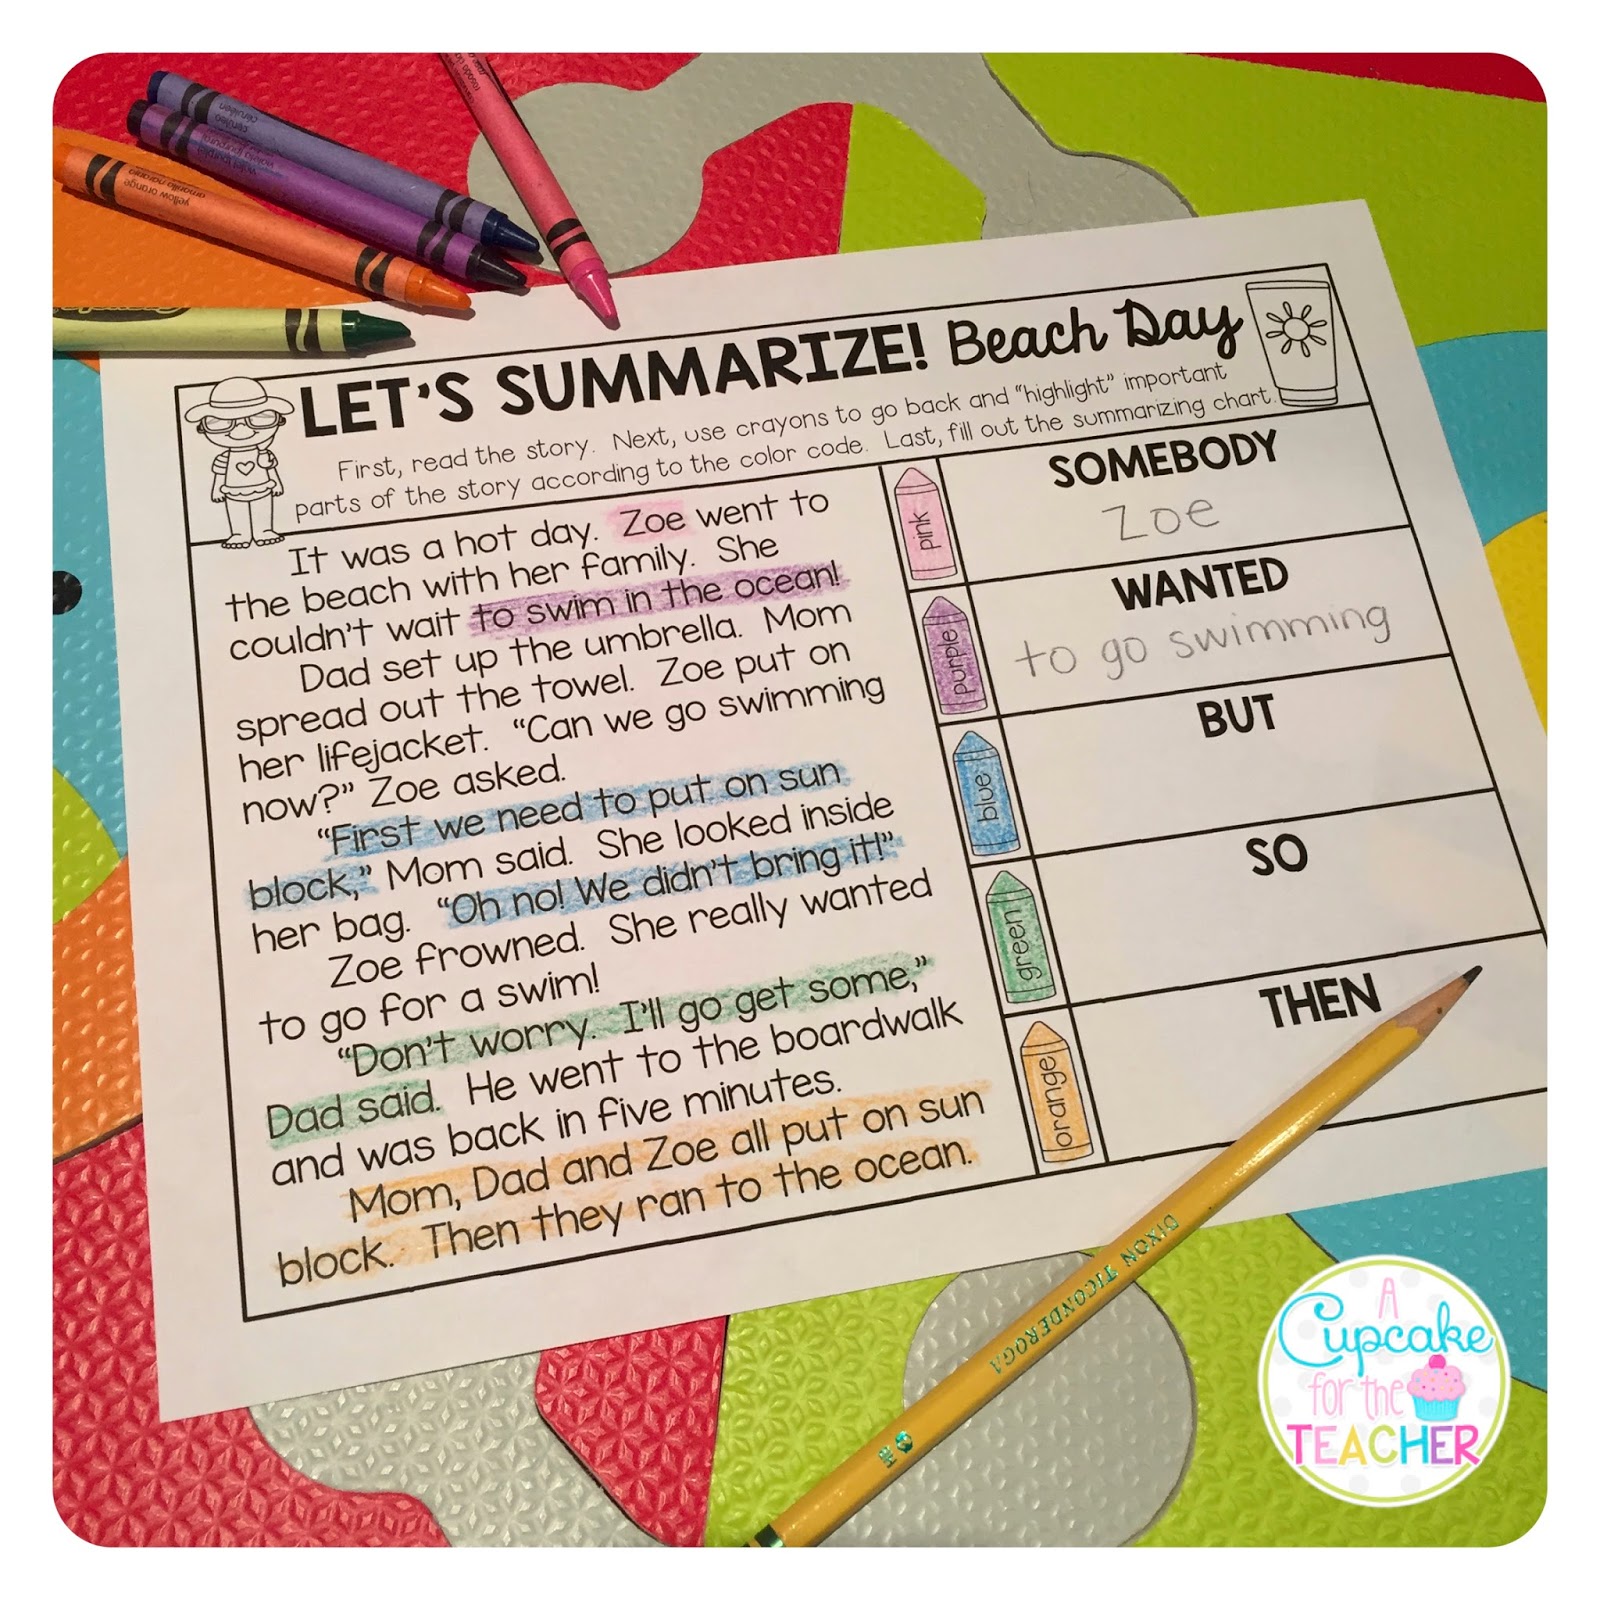 Prepare Your Anchor Charts Ahead of Time with Cricut! - Tales From a Very  Busy Teacher